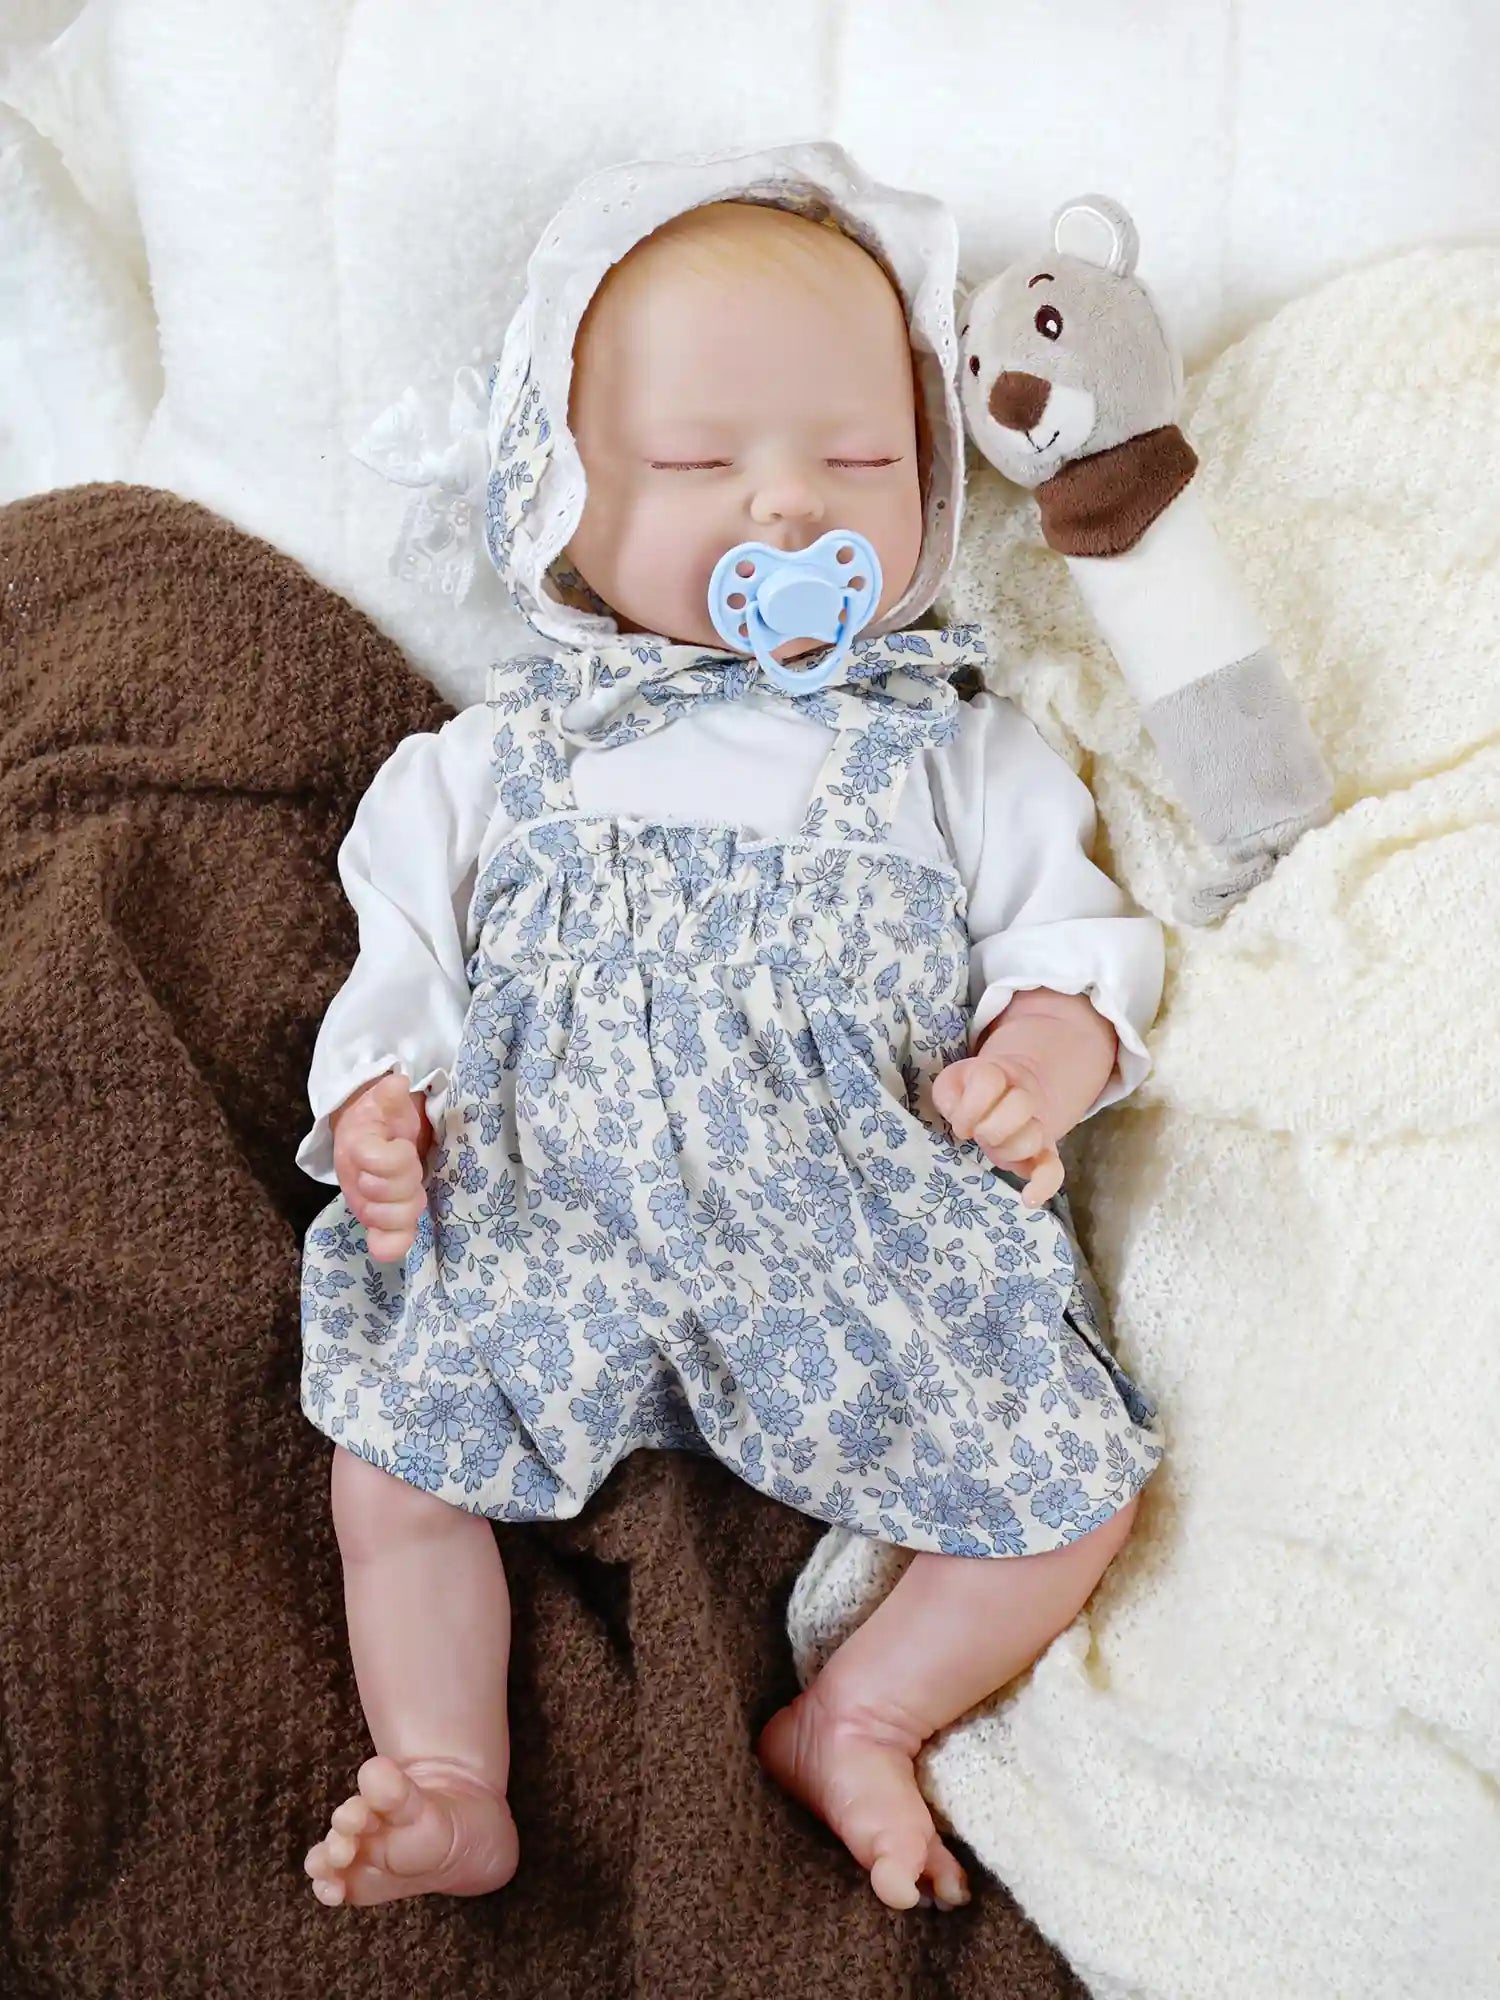 Hand-painted newborn doll with pacifier in vintage-style outfit.